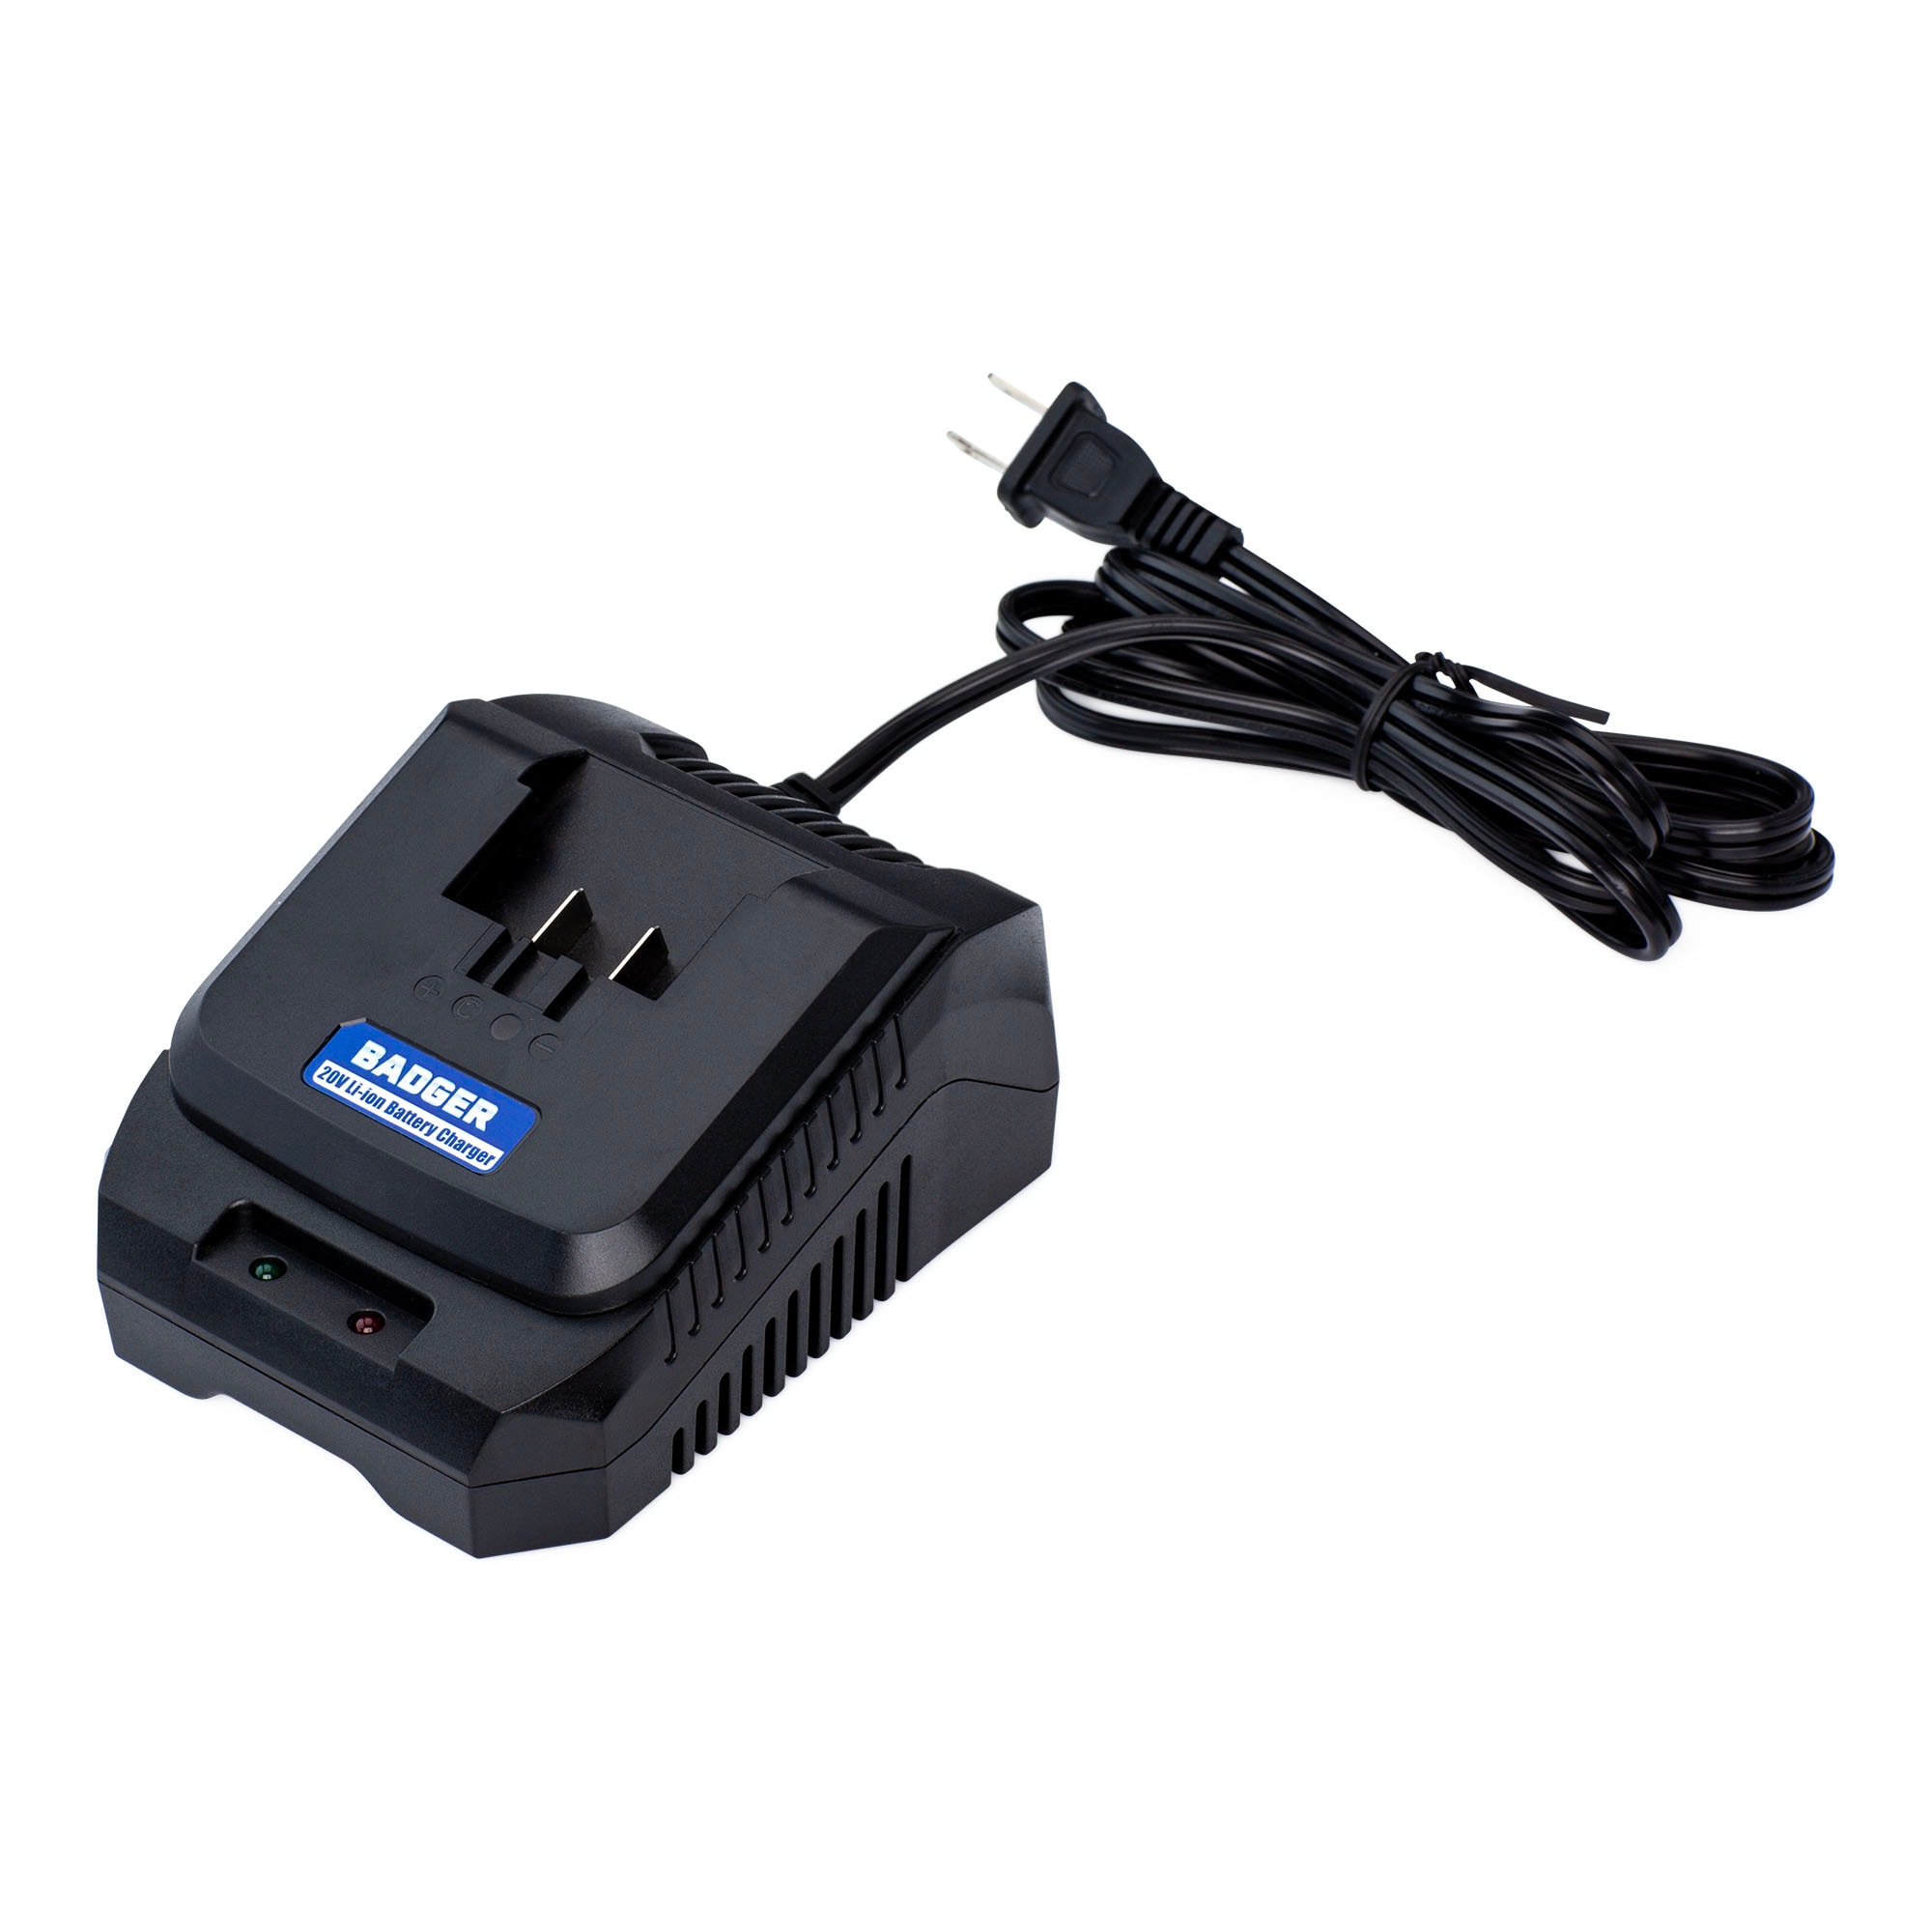 20V Lithium Ion Battery Charger USA, aus, and EU USA Charger